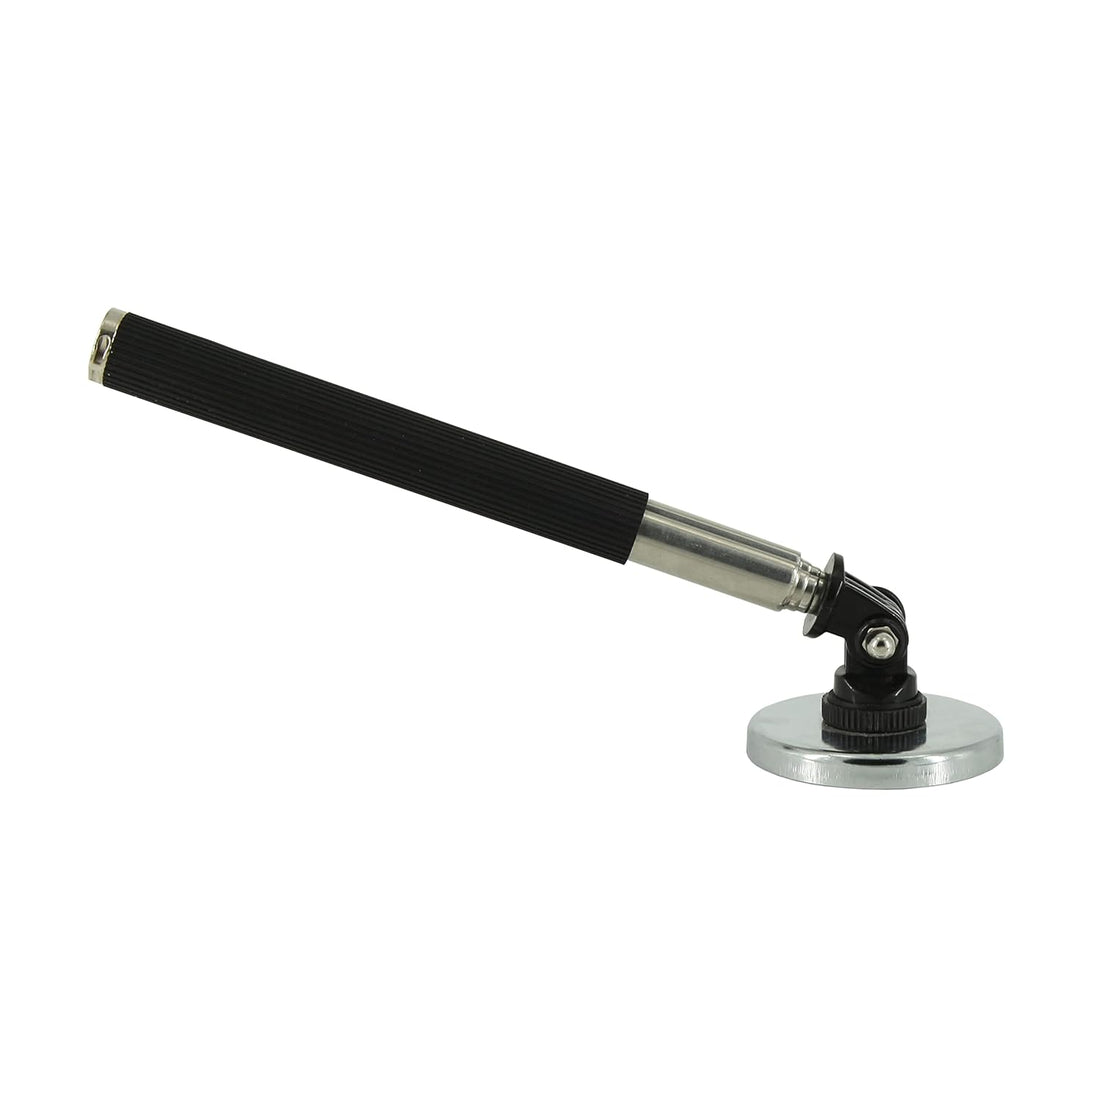 30lb Telescoping Heavy Magnetic pickup tool 36"long, large-area 2.36"magnet, the suction is more stable,Rotate telescopic handle with lanyard sweeper,Great for working with small metal parts. (1PCS)